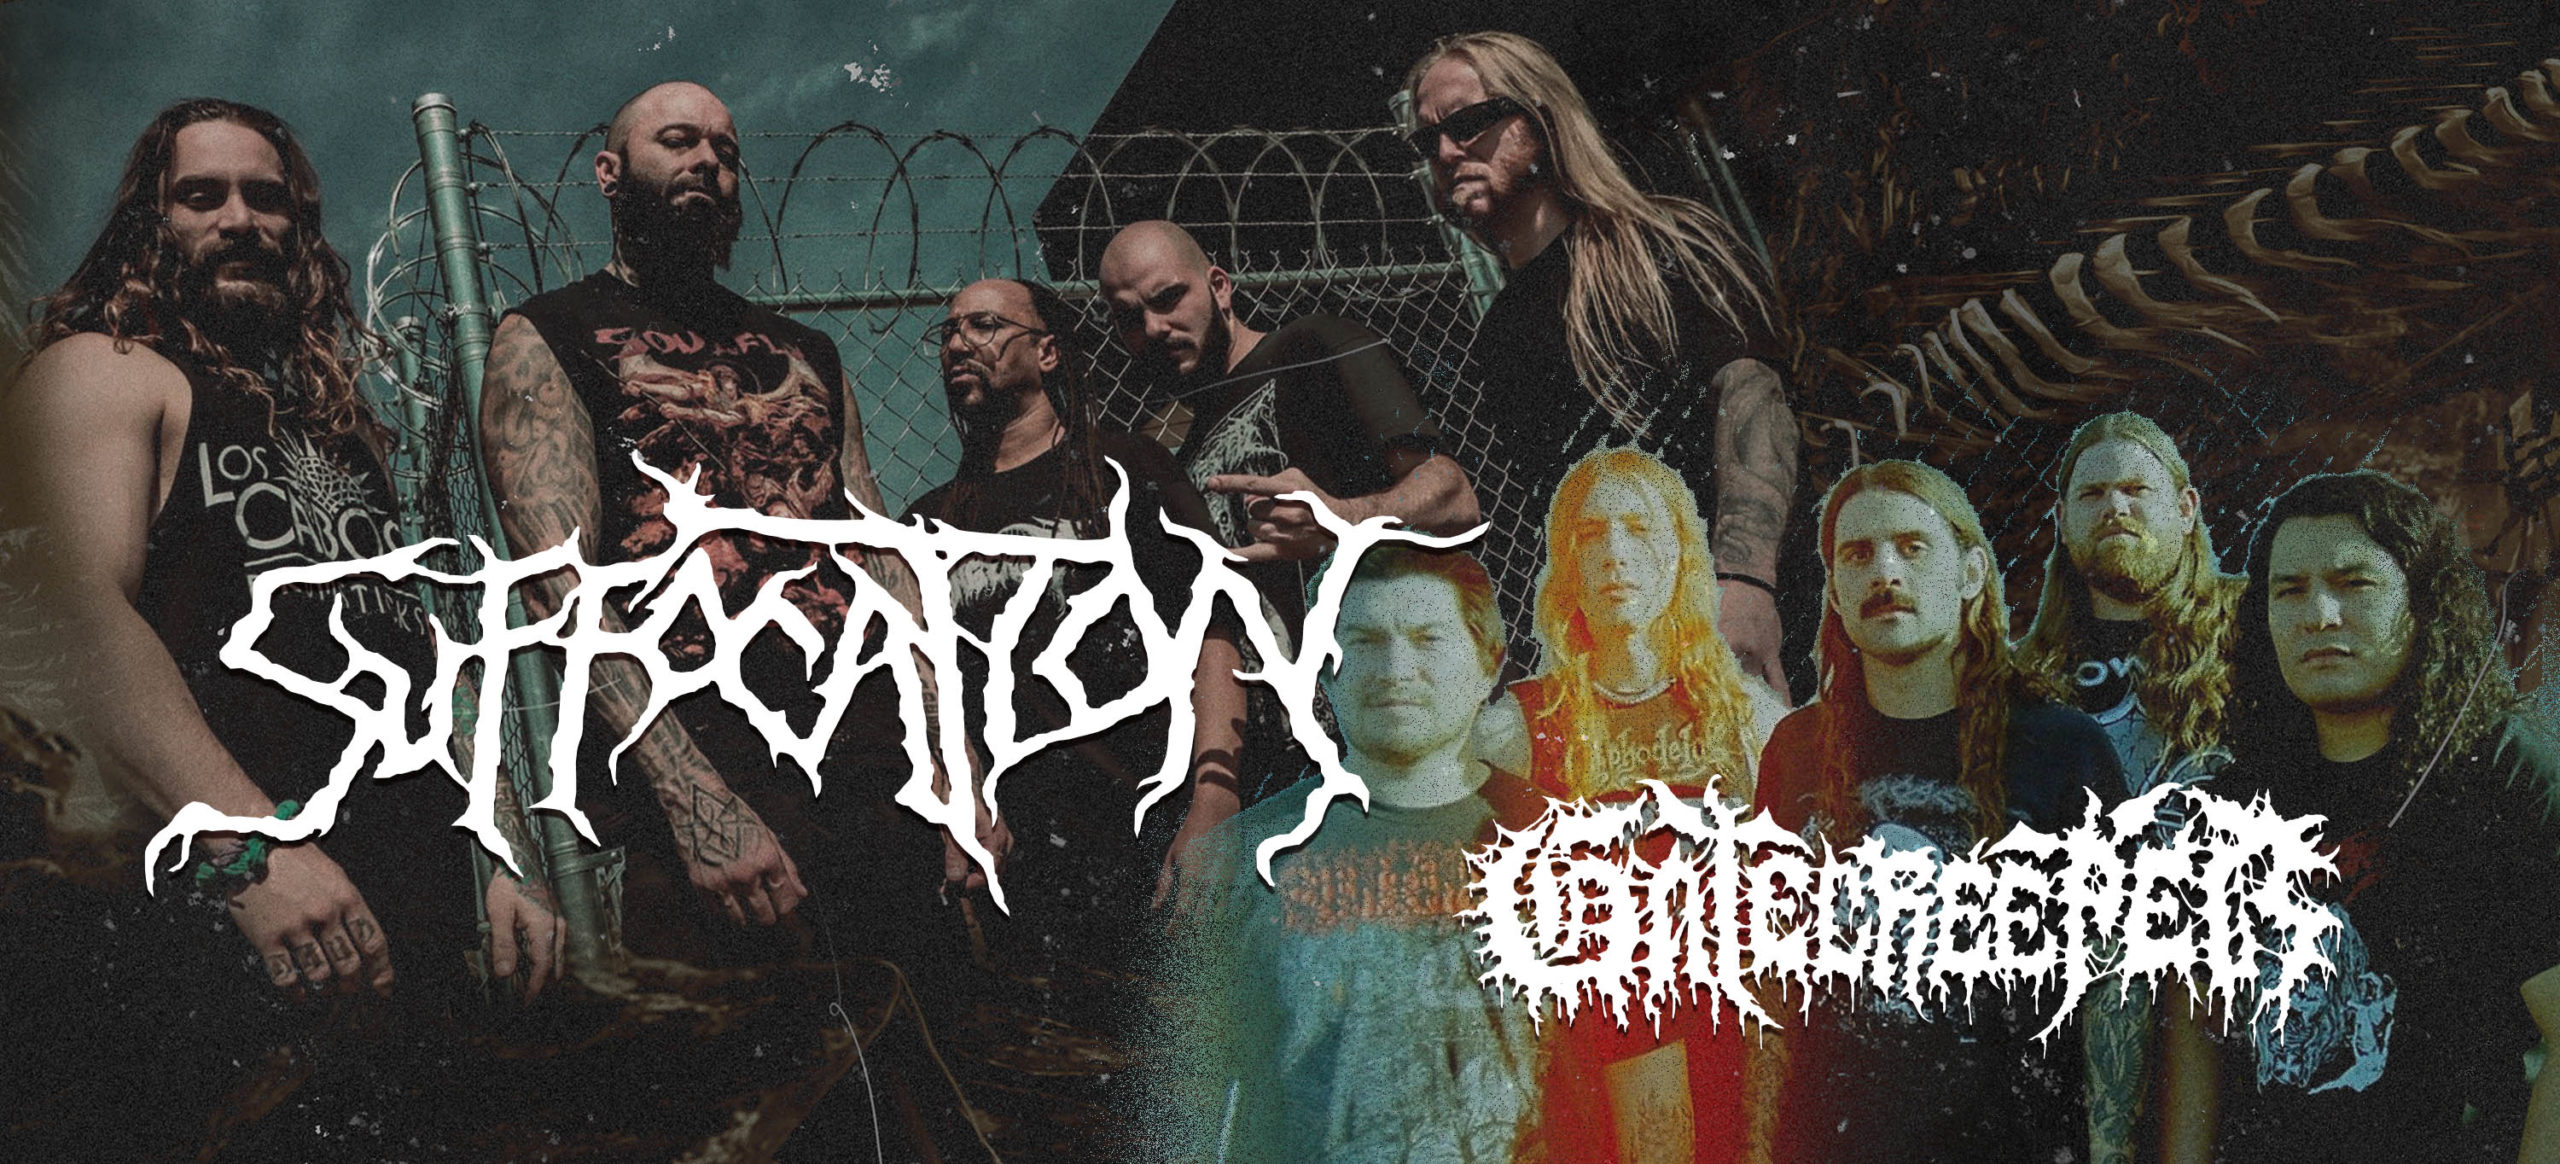 Death Metal Heavyweights SUFFOCATION and GATECREEPER are Coming to Manila!